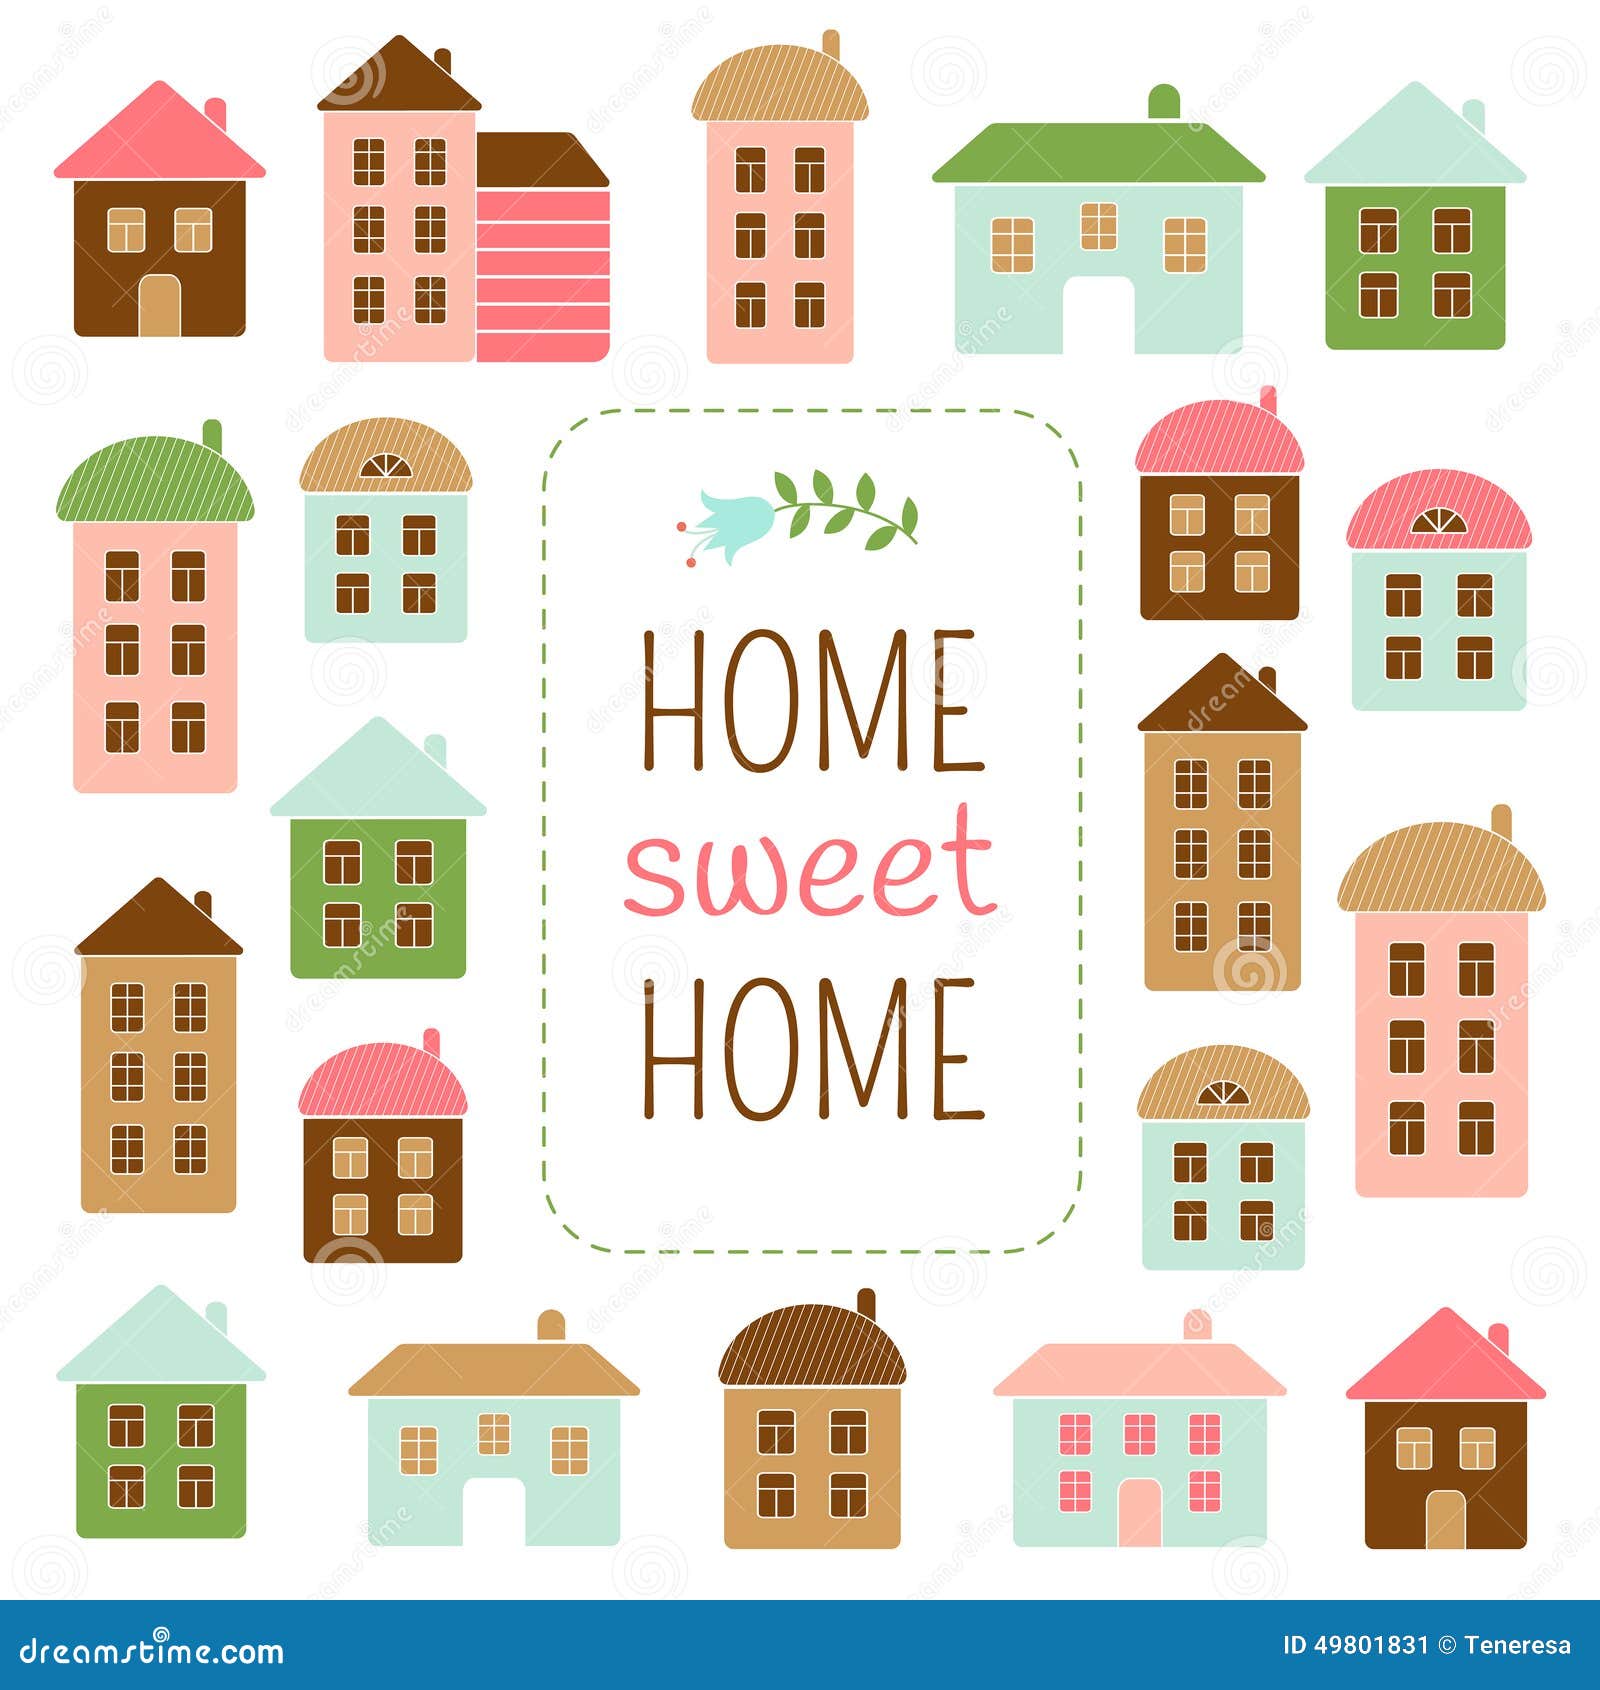 home sweet home clipart pictures - photo #27